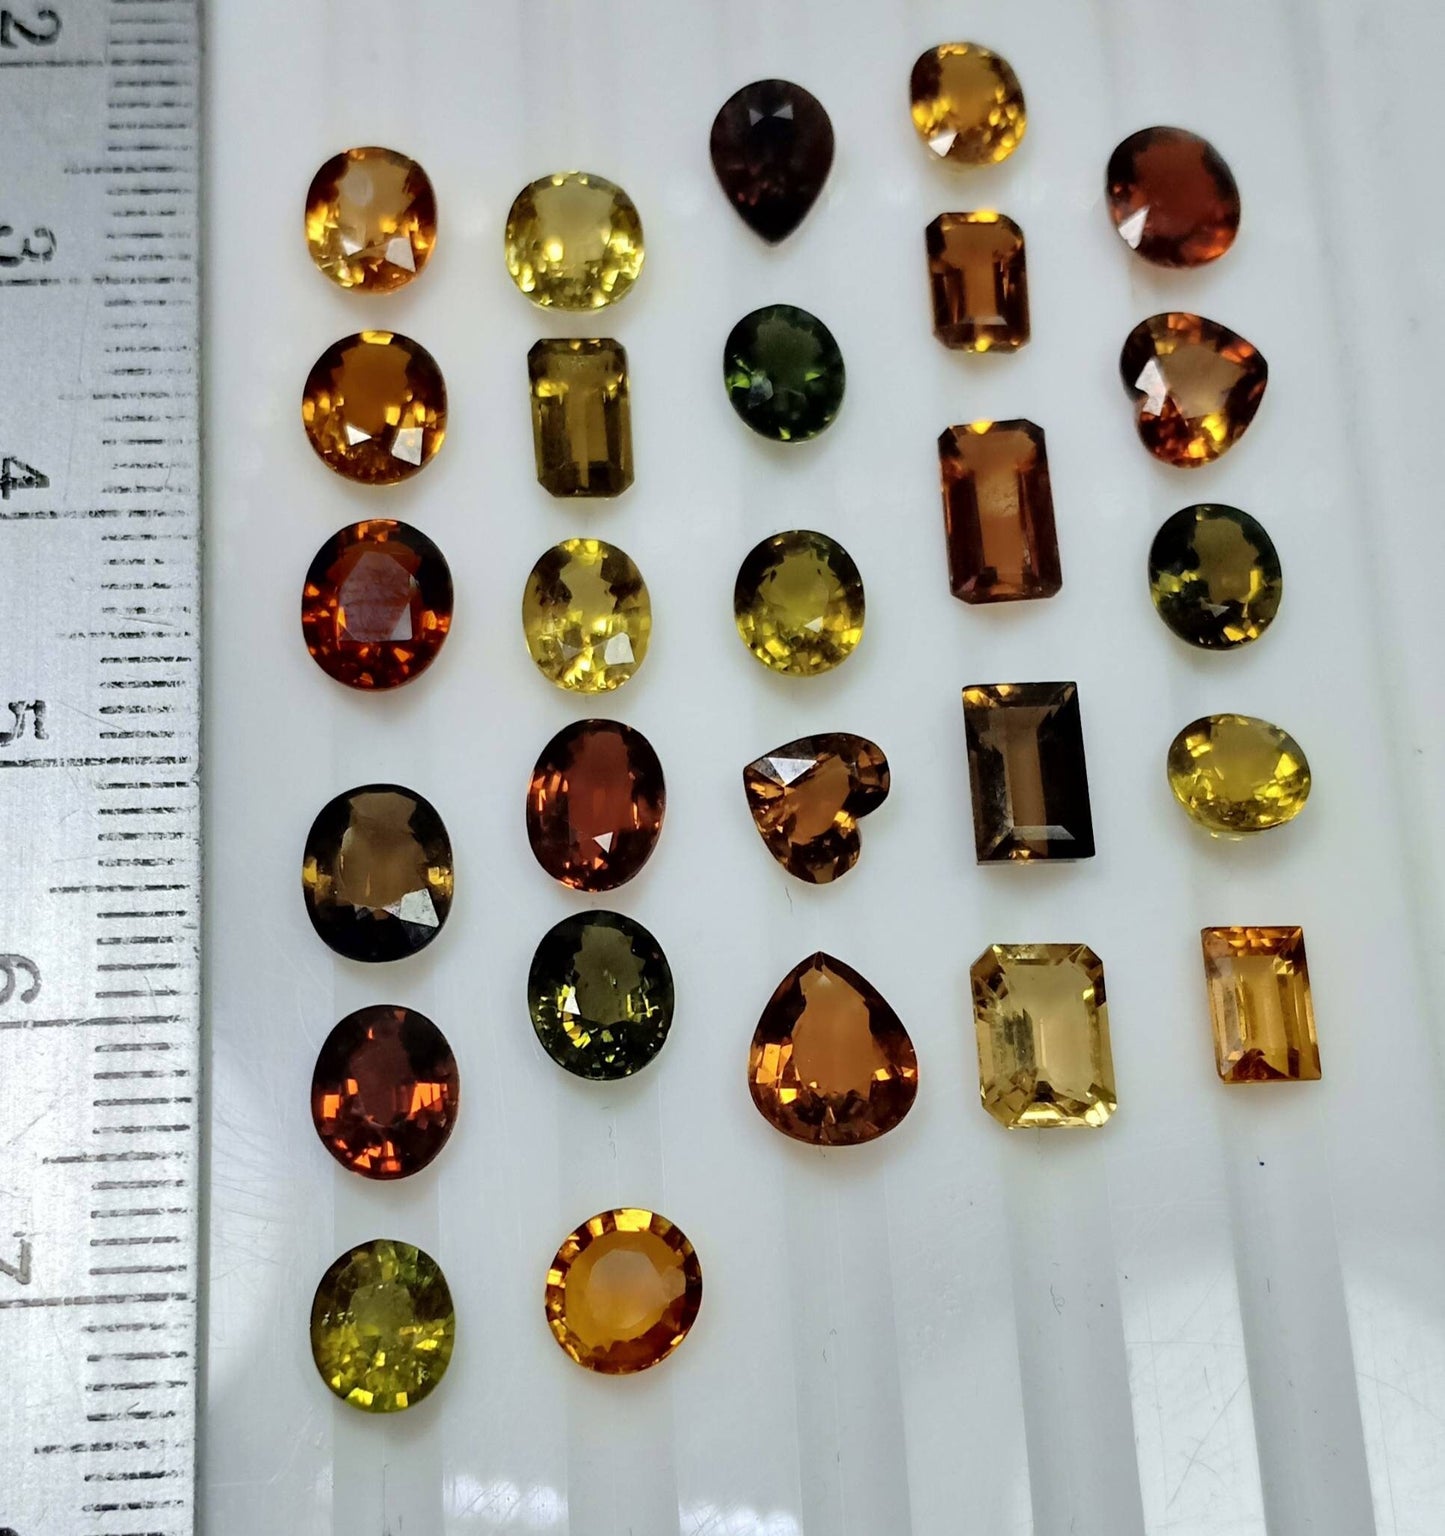 Natural multi color faceted tourmaline gems 27 pieces 20 carats weight